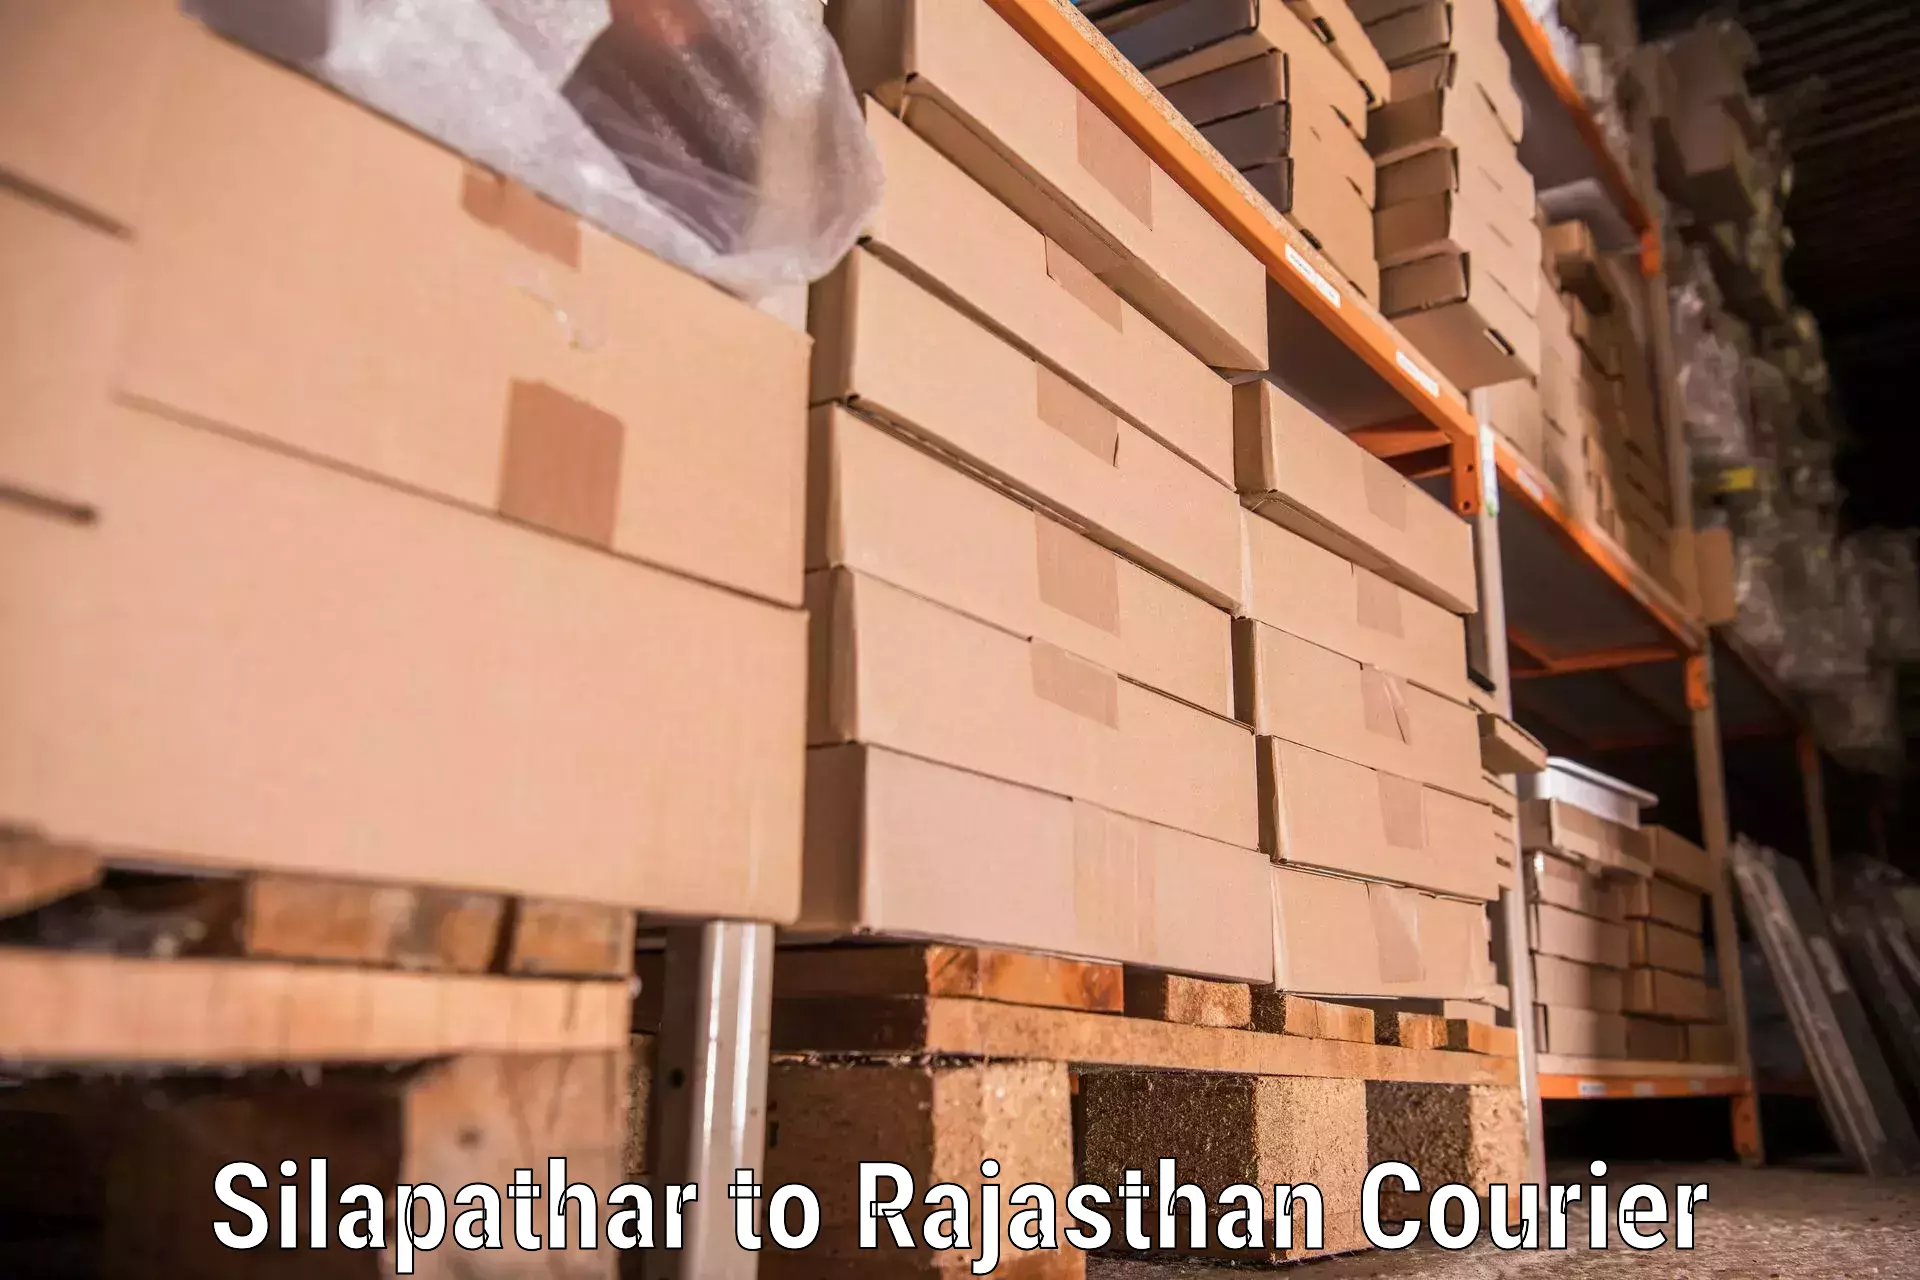 Moving and storage services Silapathar to Nasirabad